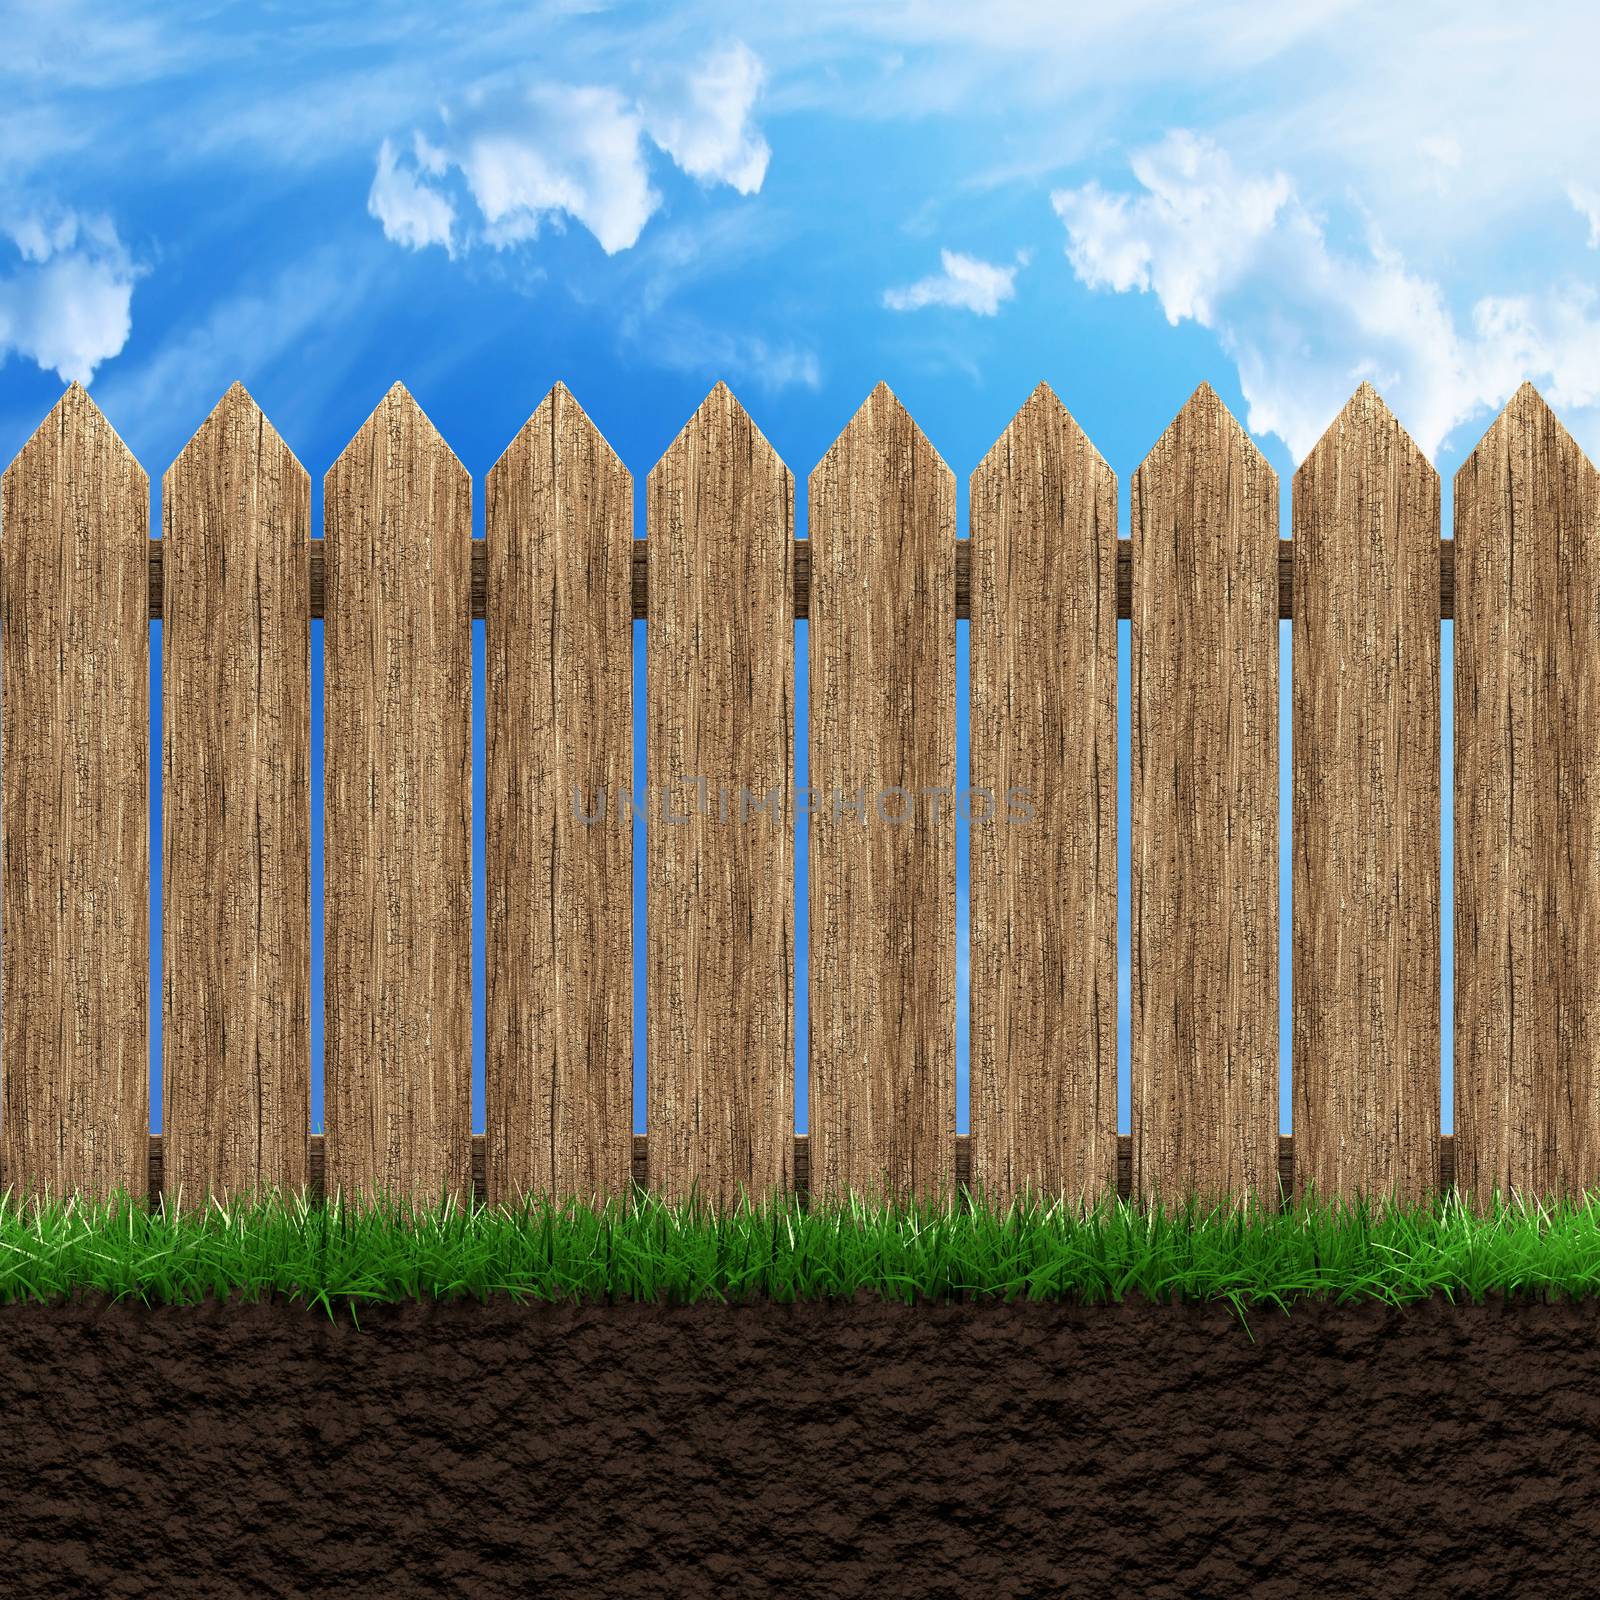 Wooden fence grass and blue sky 3d illustration